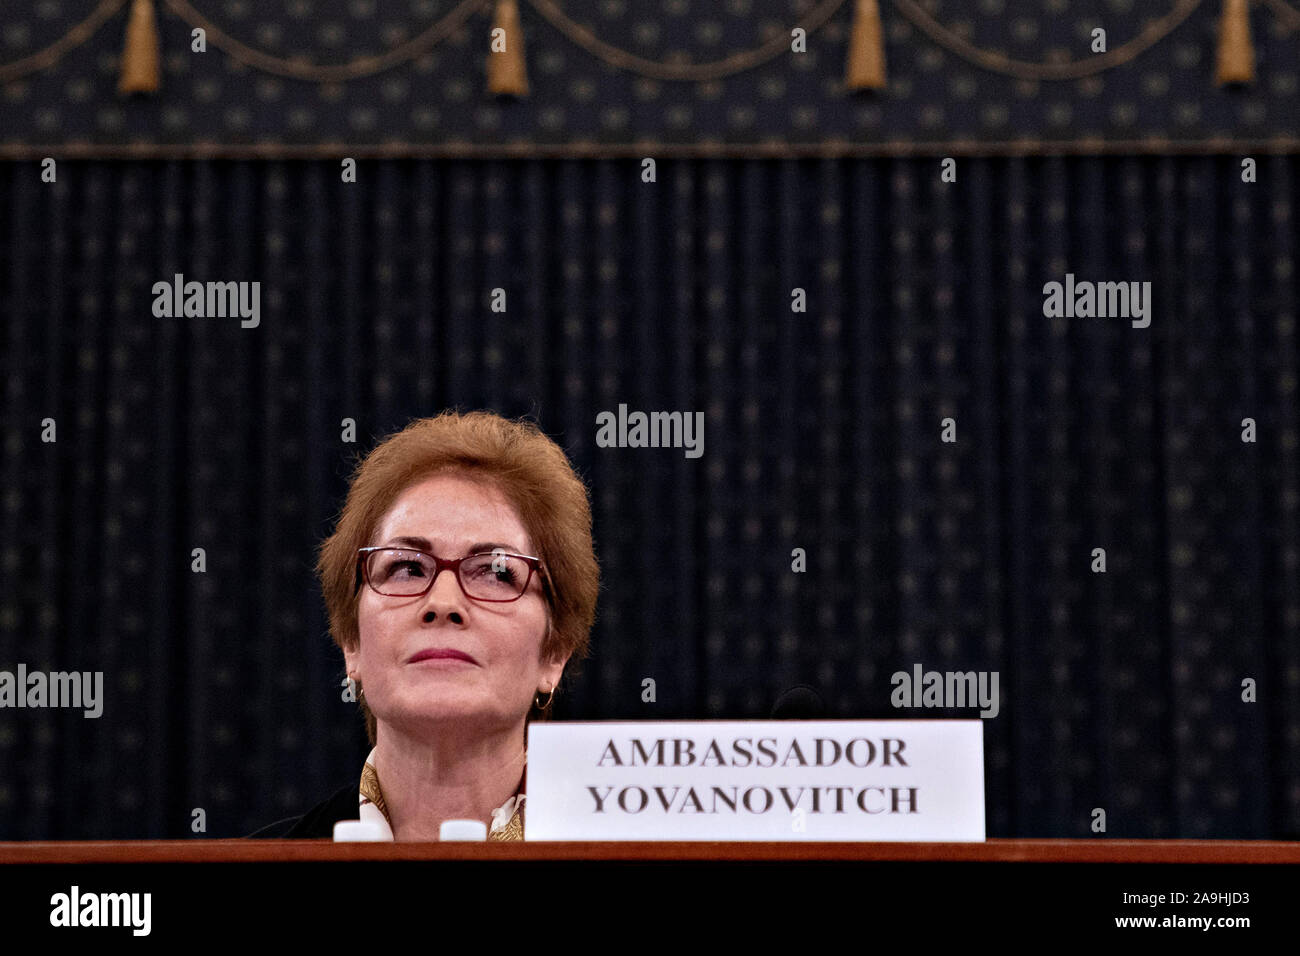 Washington, USA. 15th Nov 2019. Washington, DC, USA. 15th Nov, 2019. Marie Yovanovitch, former U.S. Ambassador to Ukraine, listens during a House Intelligence Committee impeachment inquiry hearing in Washington, DC, U.S., on Friday, Nov. 15, 2019. Yovanovitch testified in private on October 11 that she was called back to Washington after a 'concerted campaign' by President Trump and his allies, including Rudy Giuliani, according to a transcript released later. Credit: Andrew Harrer/Pool via CNP | usage worldwide Credit: dpa/Alamy Live News Stock Photo